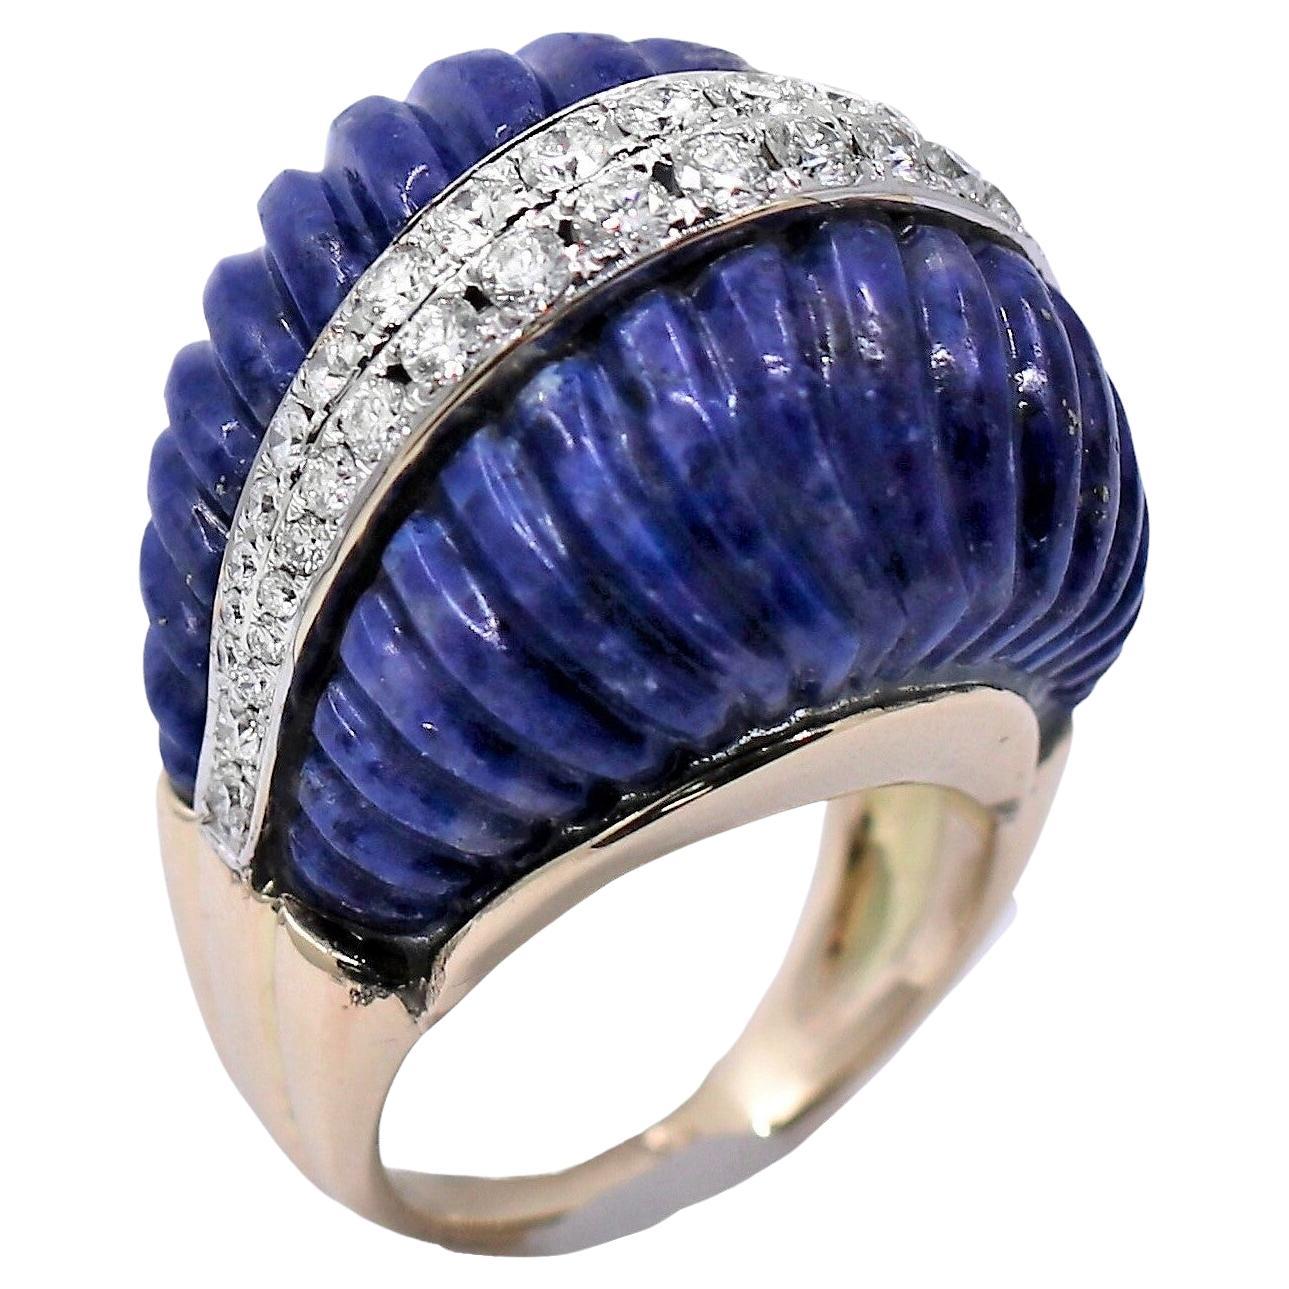 Big and Bold Vintage Yellow Gold, Fluted Lapis-Lazuli and Diamond Dome Ring.